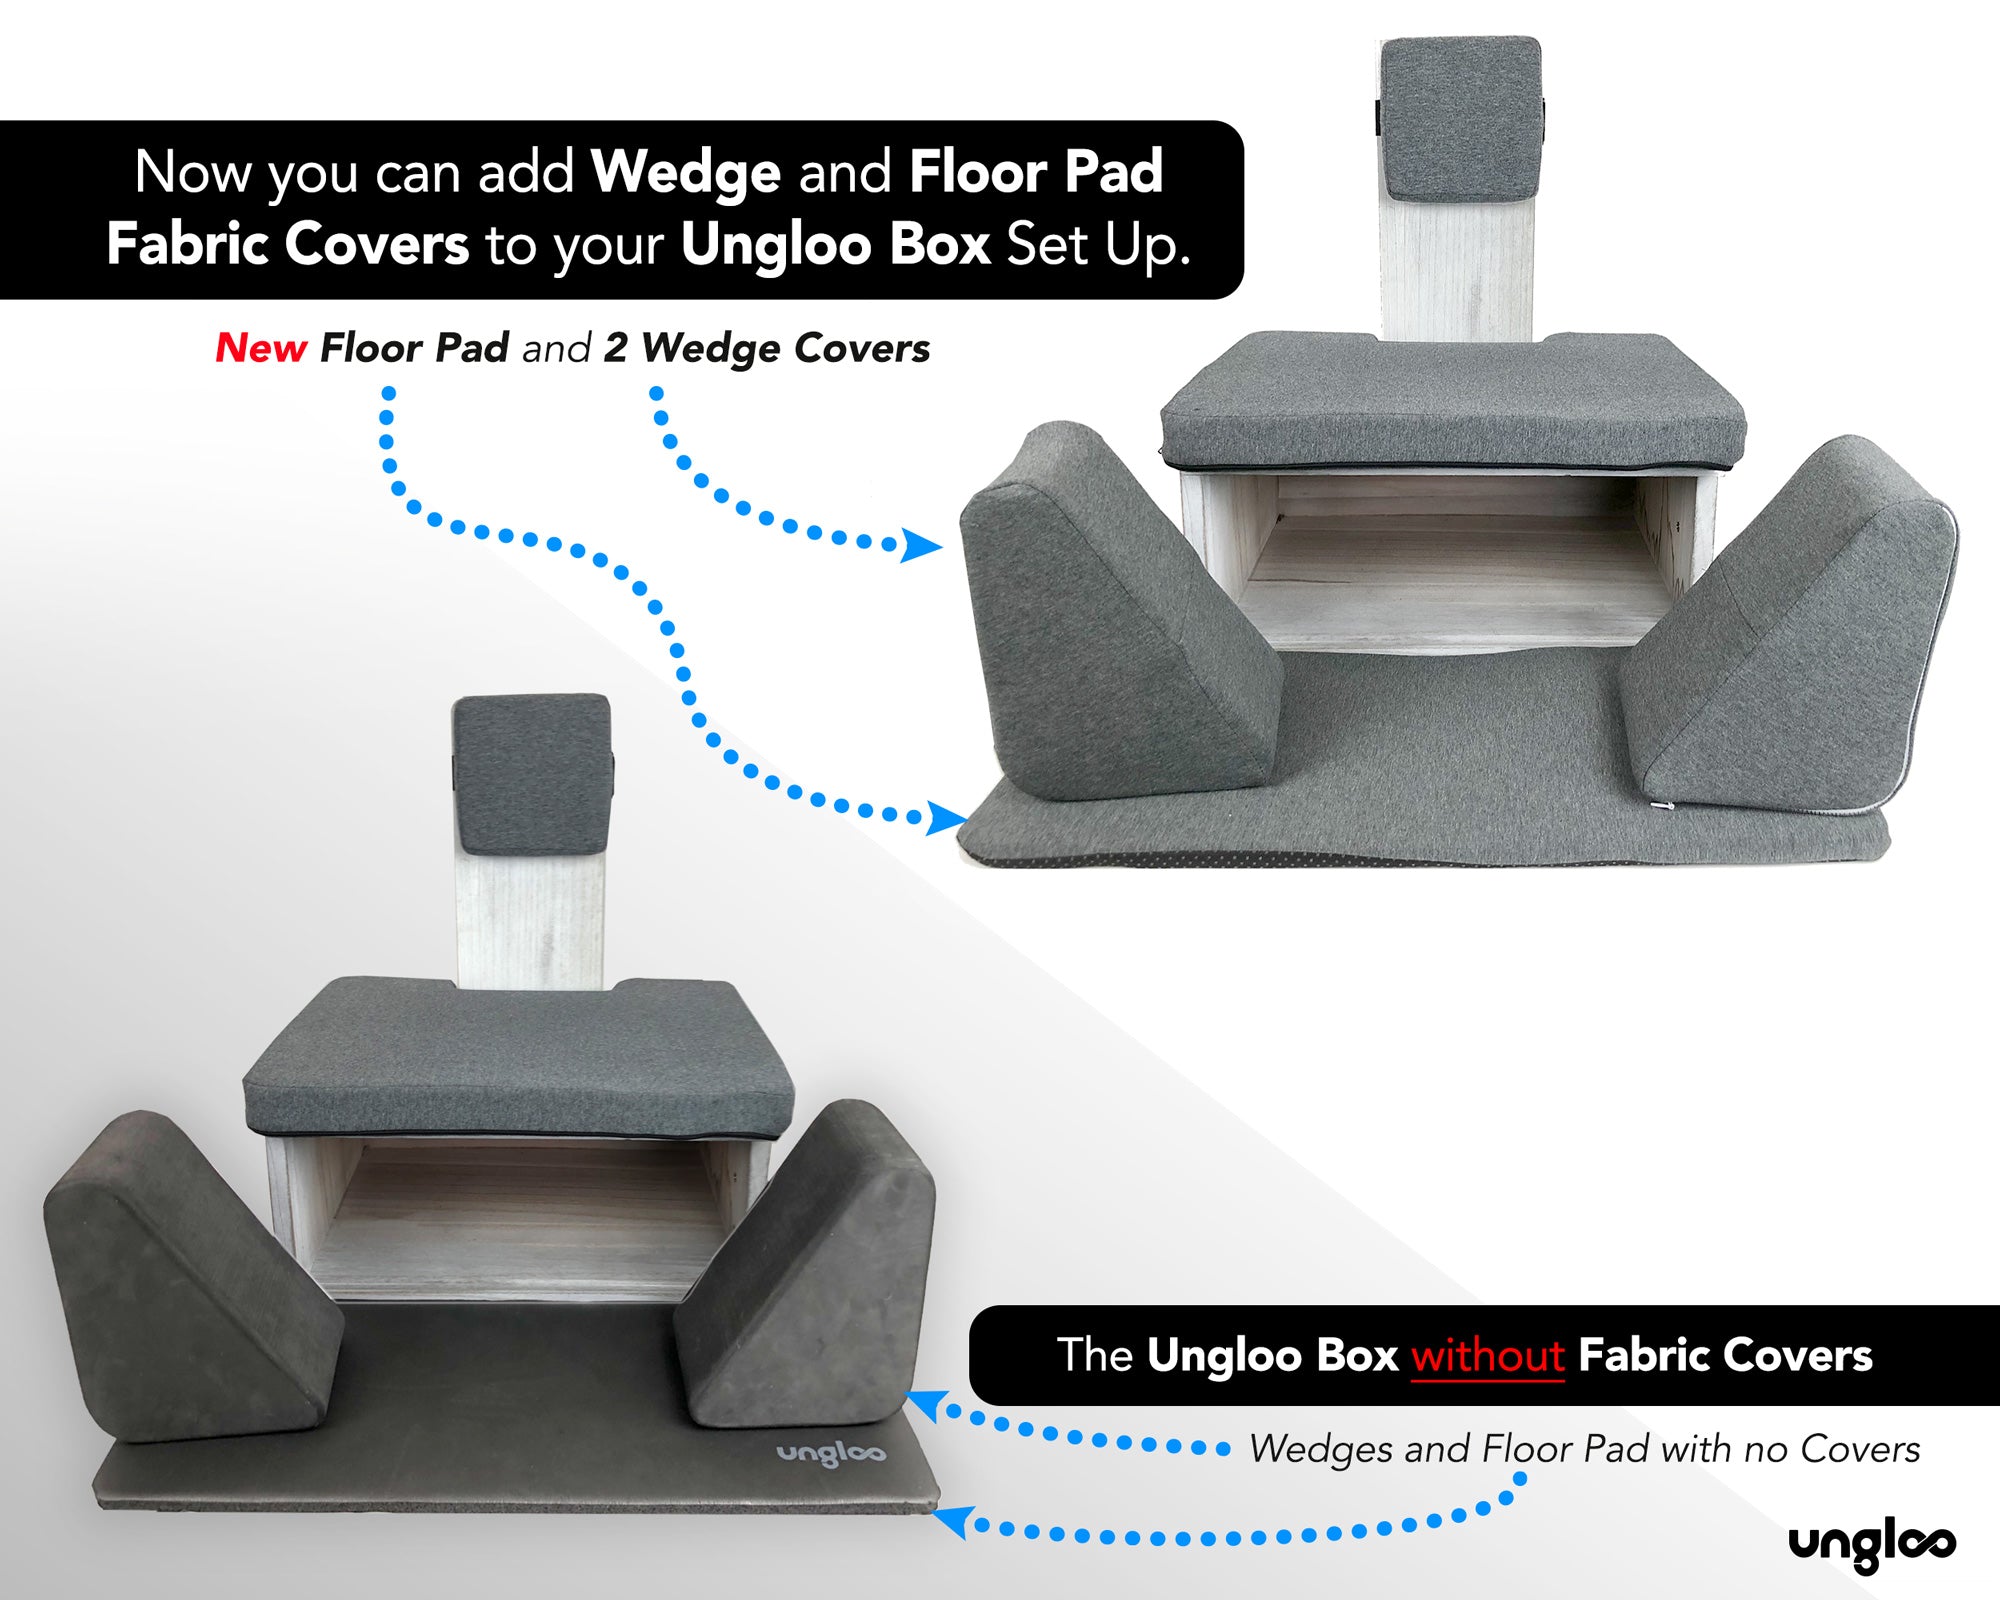 Ungloo Box Fabric Covers for Wedges and Floor Pad